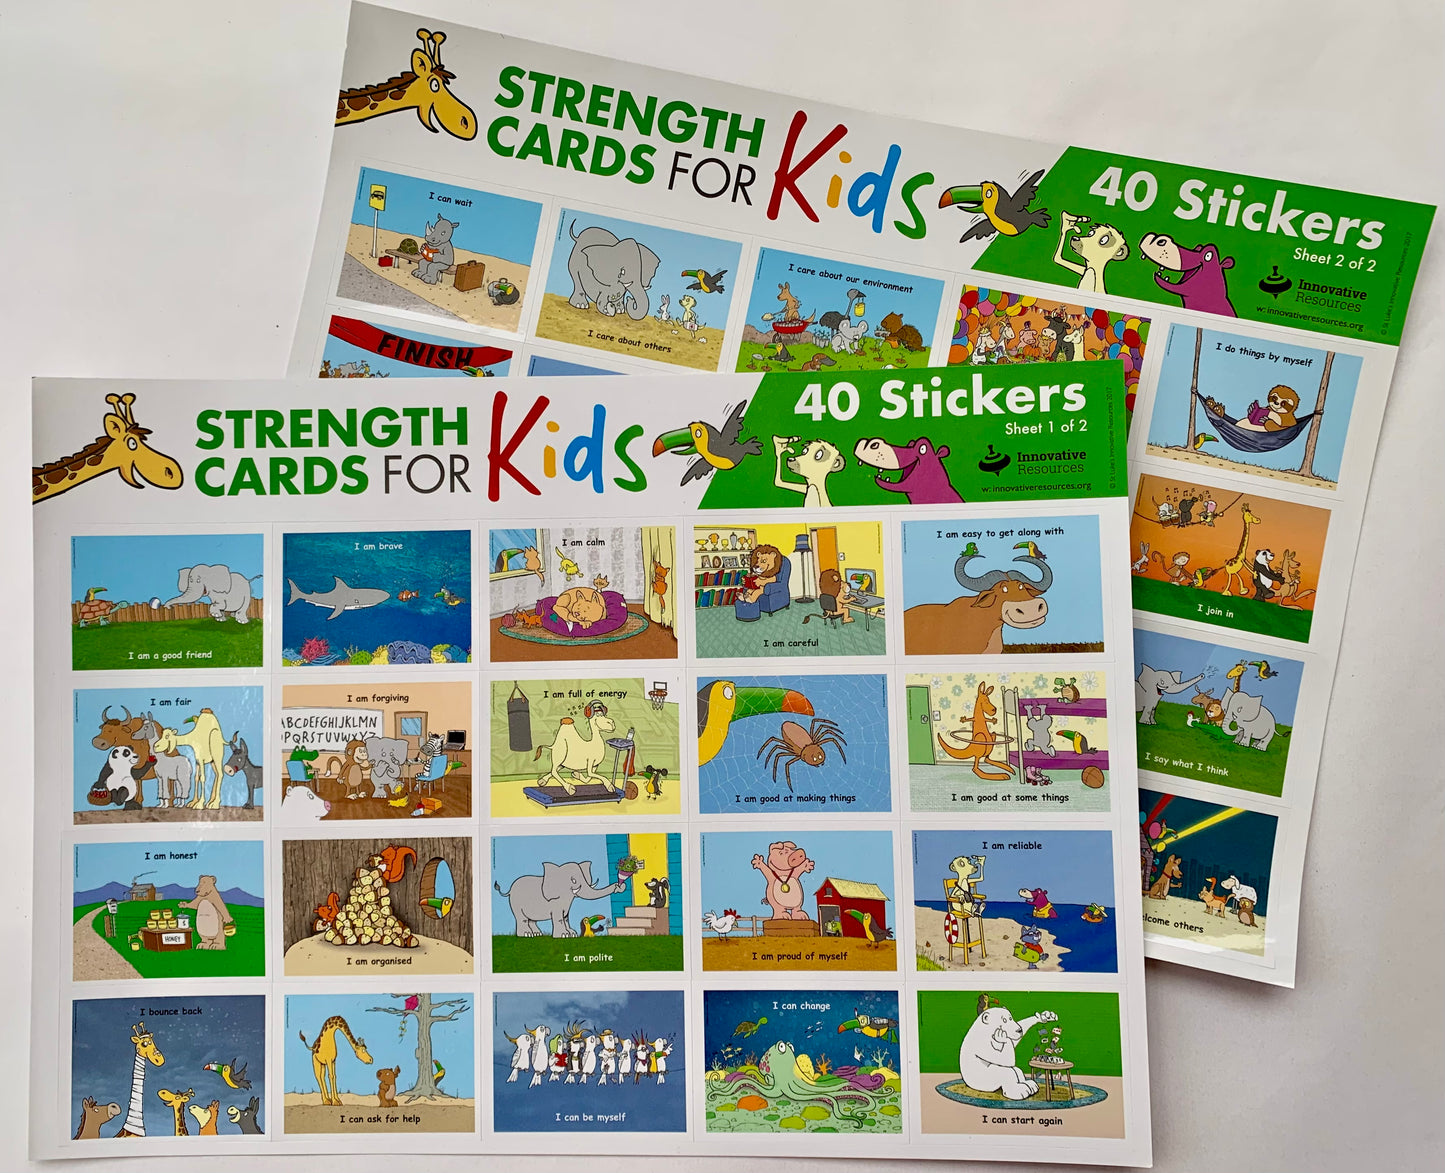 Strengths Stickers for Kids (40 stickers)